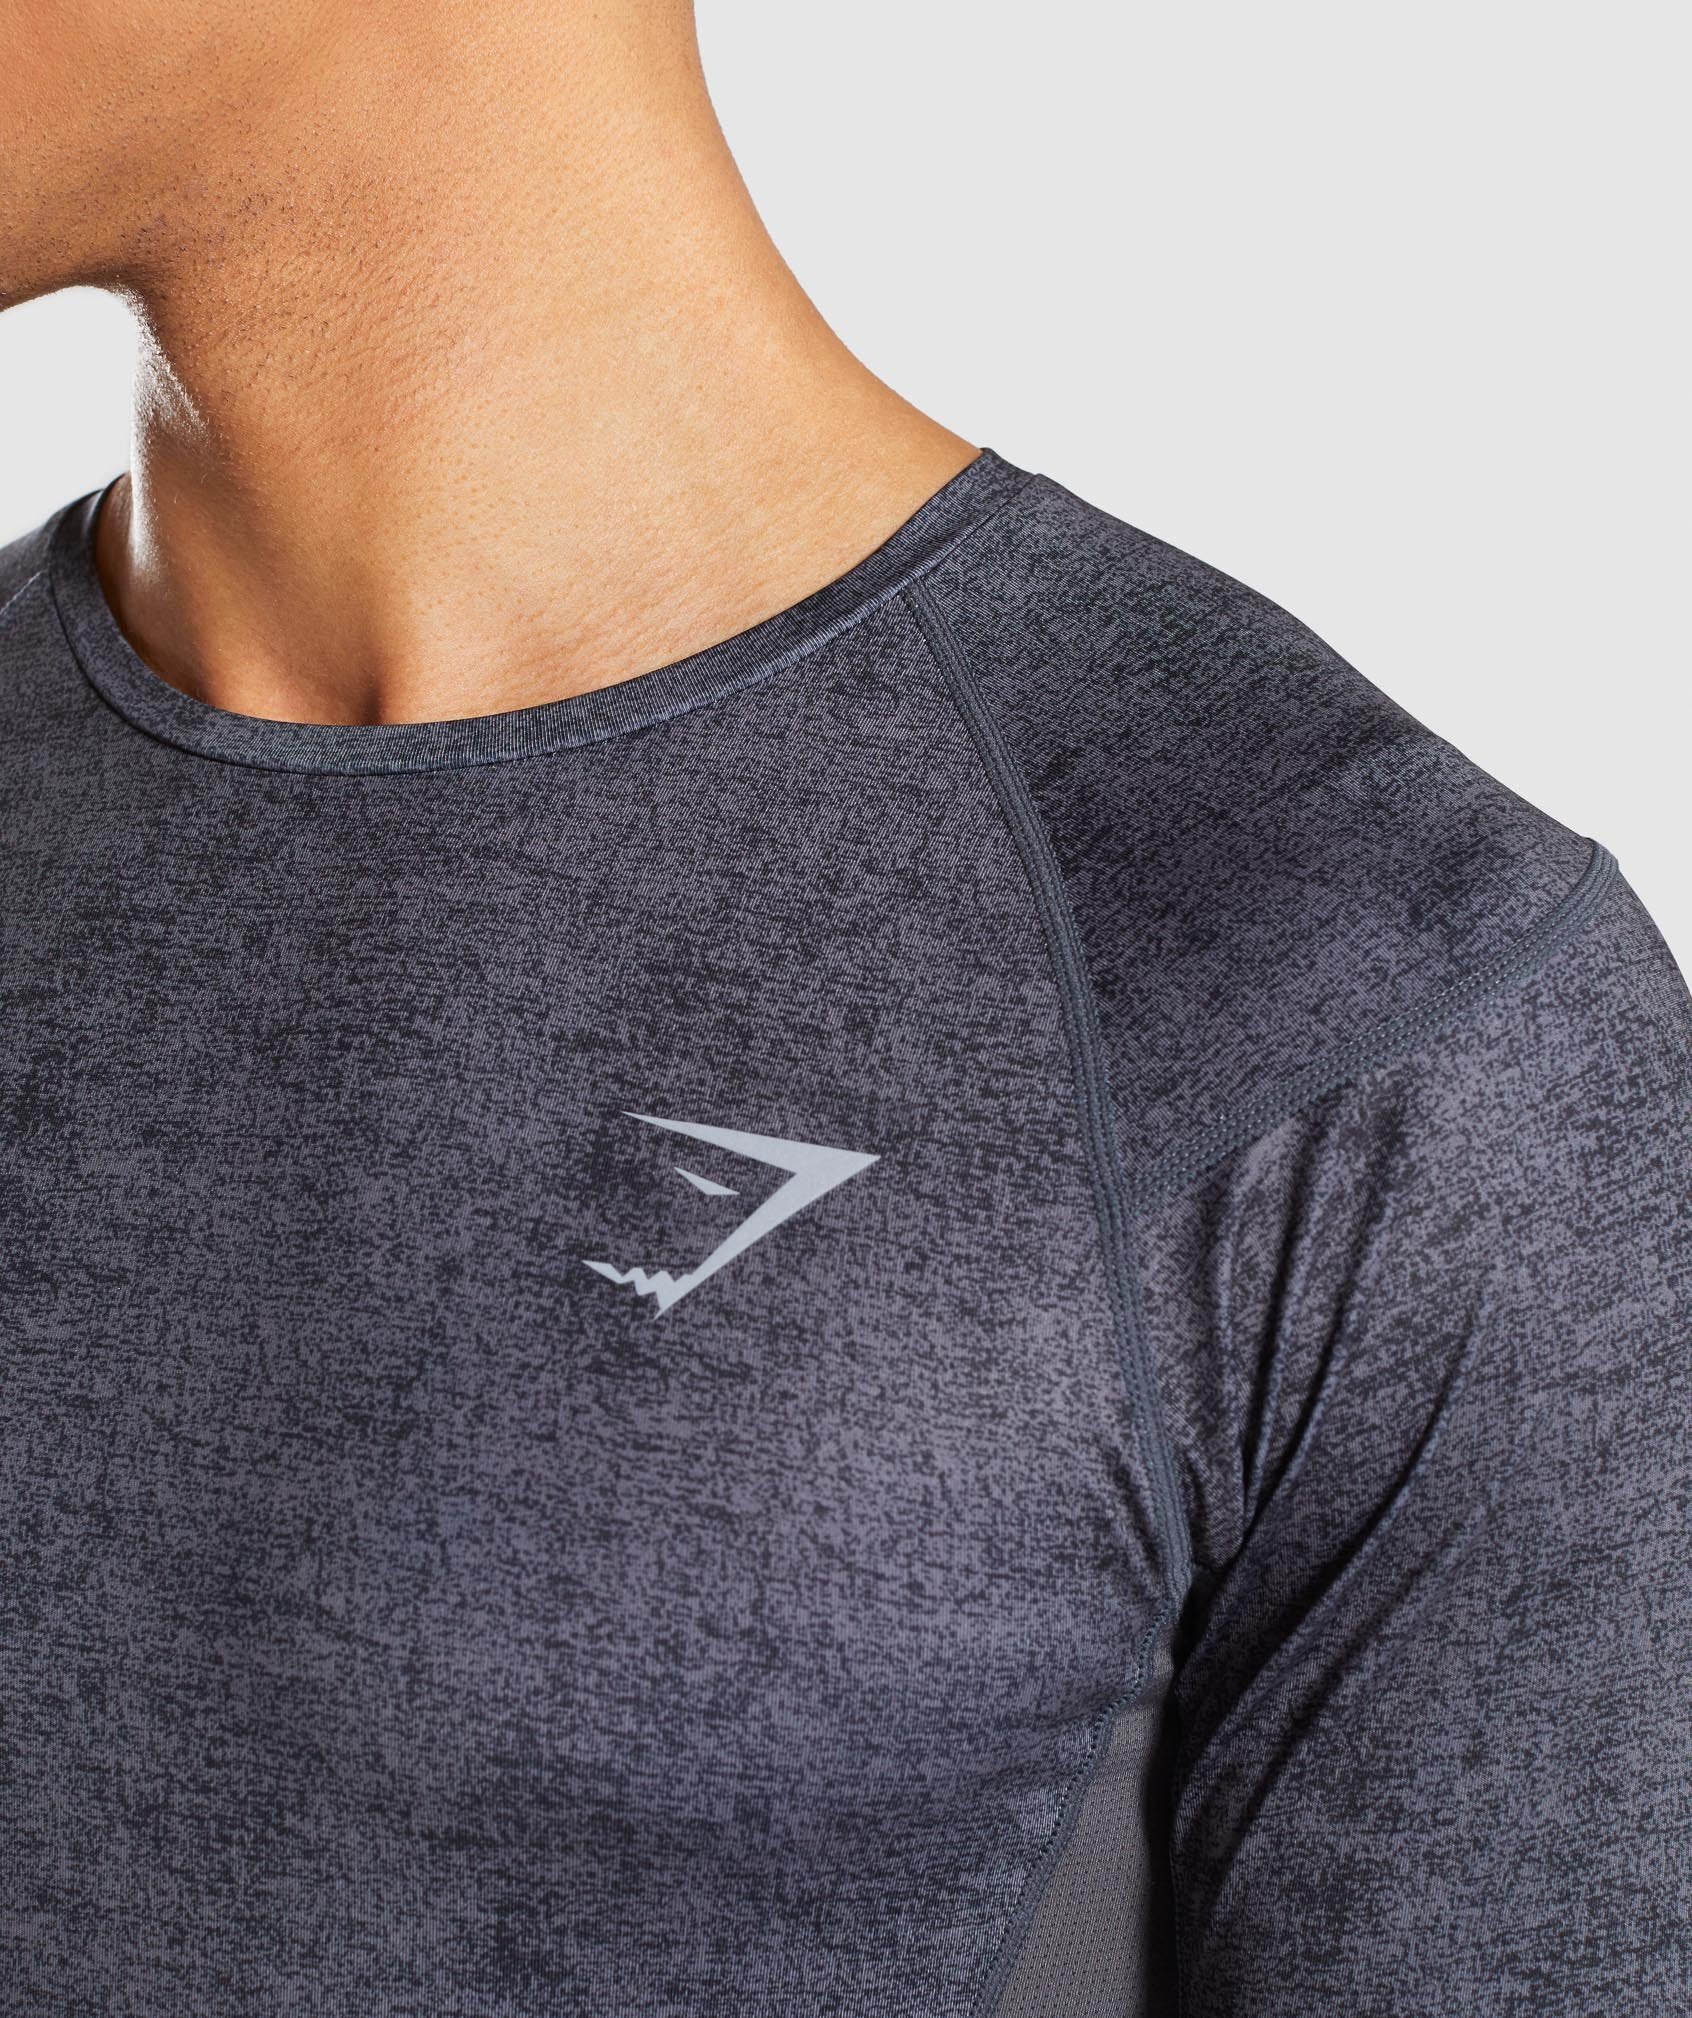 Hybrid Baselayer Top in Charcoal Marl - view 5